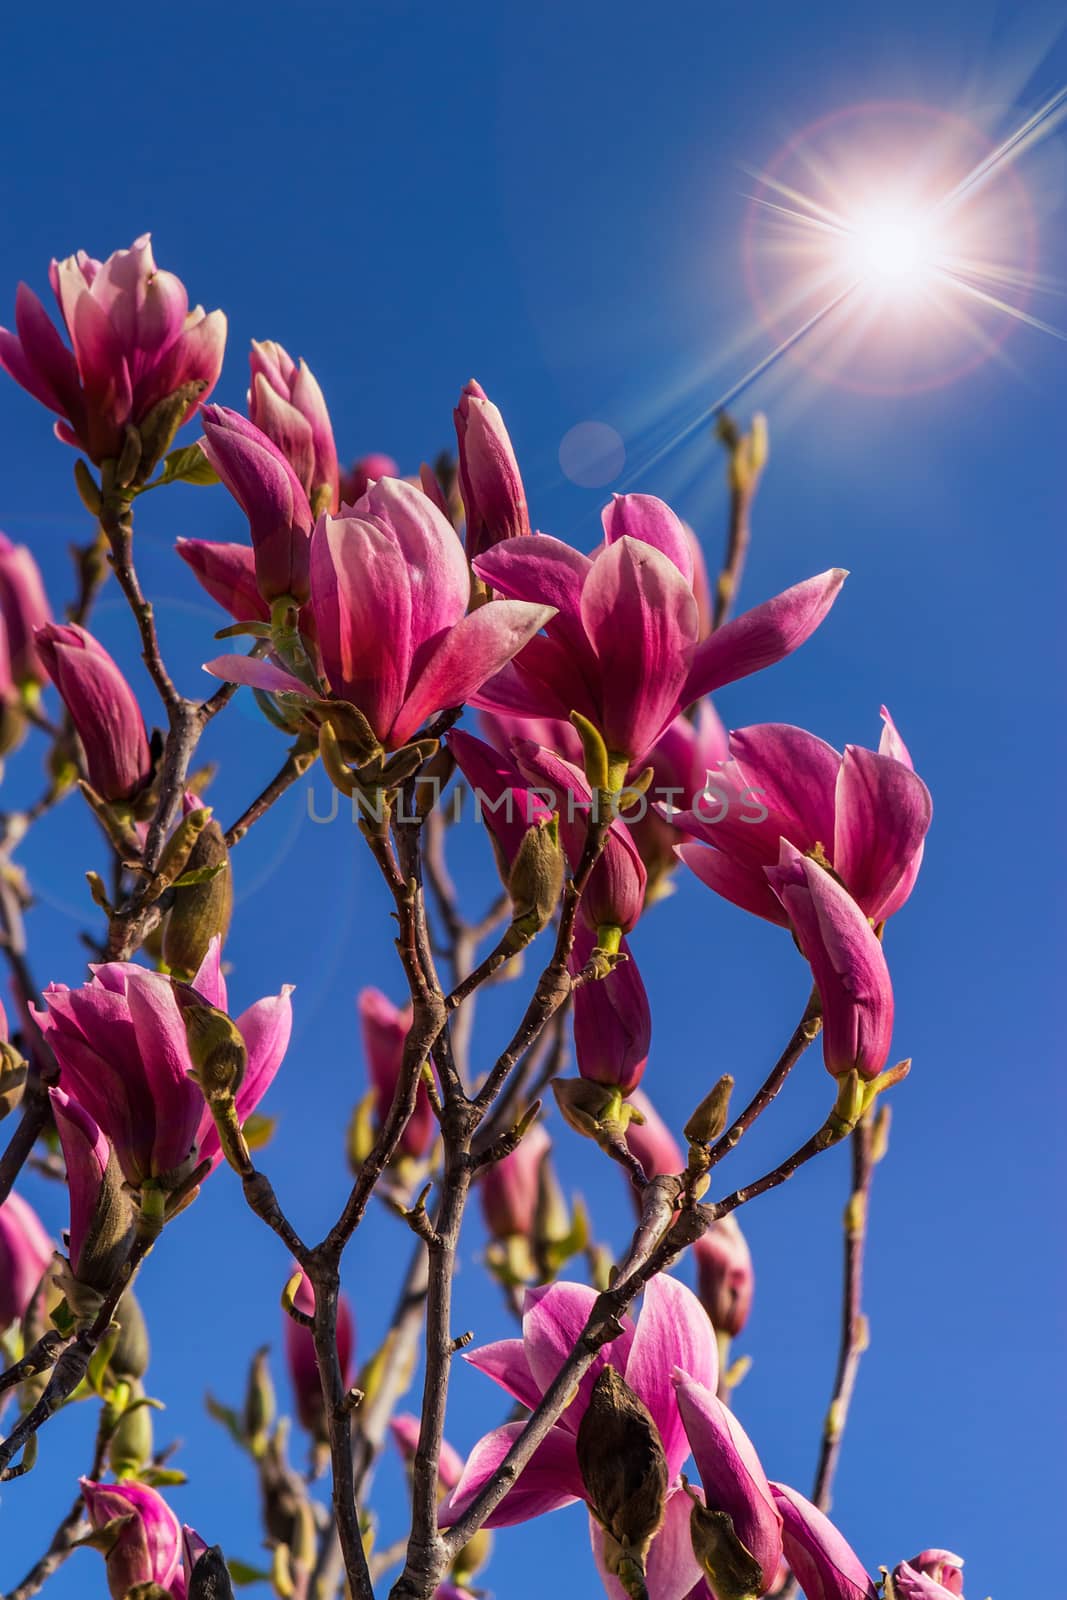 magnolia flowers on a blury background at sunset by Pellinni